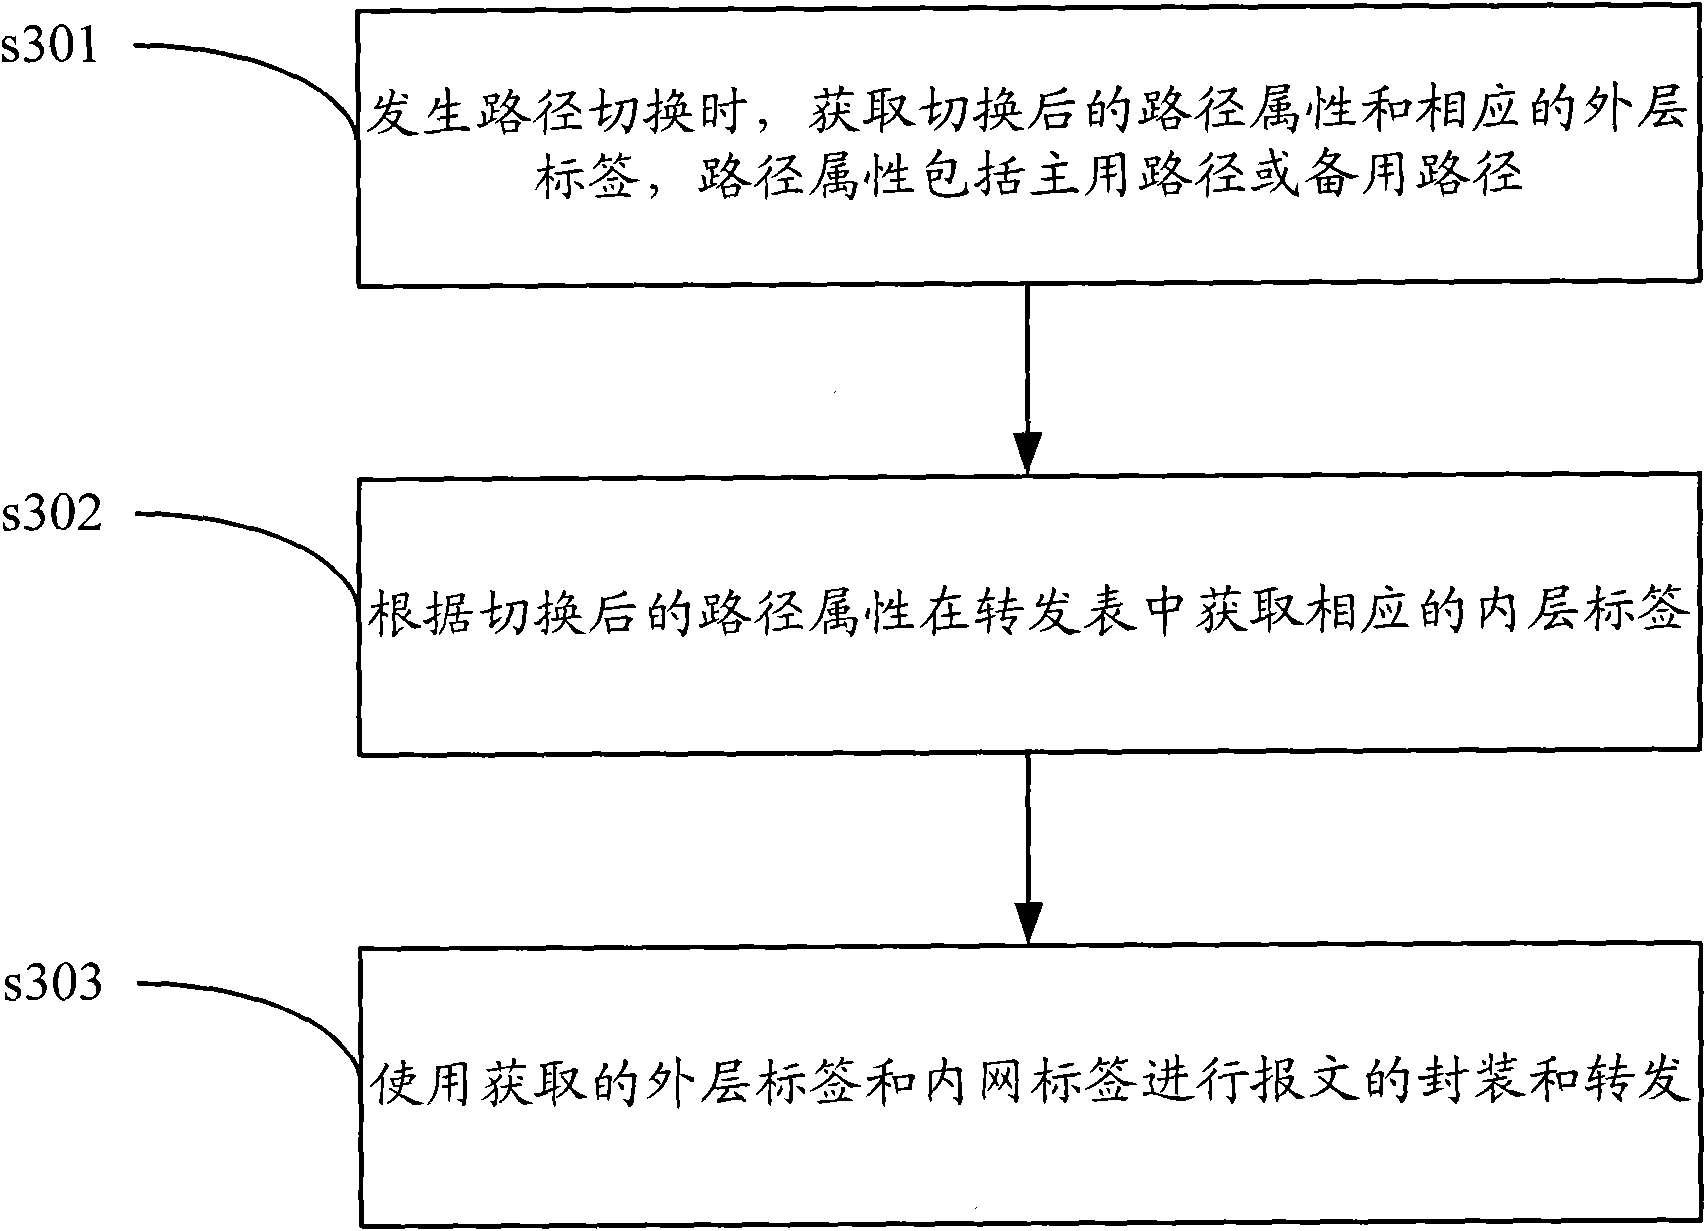 Protection switching method and equipment thereof